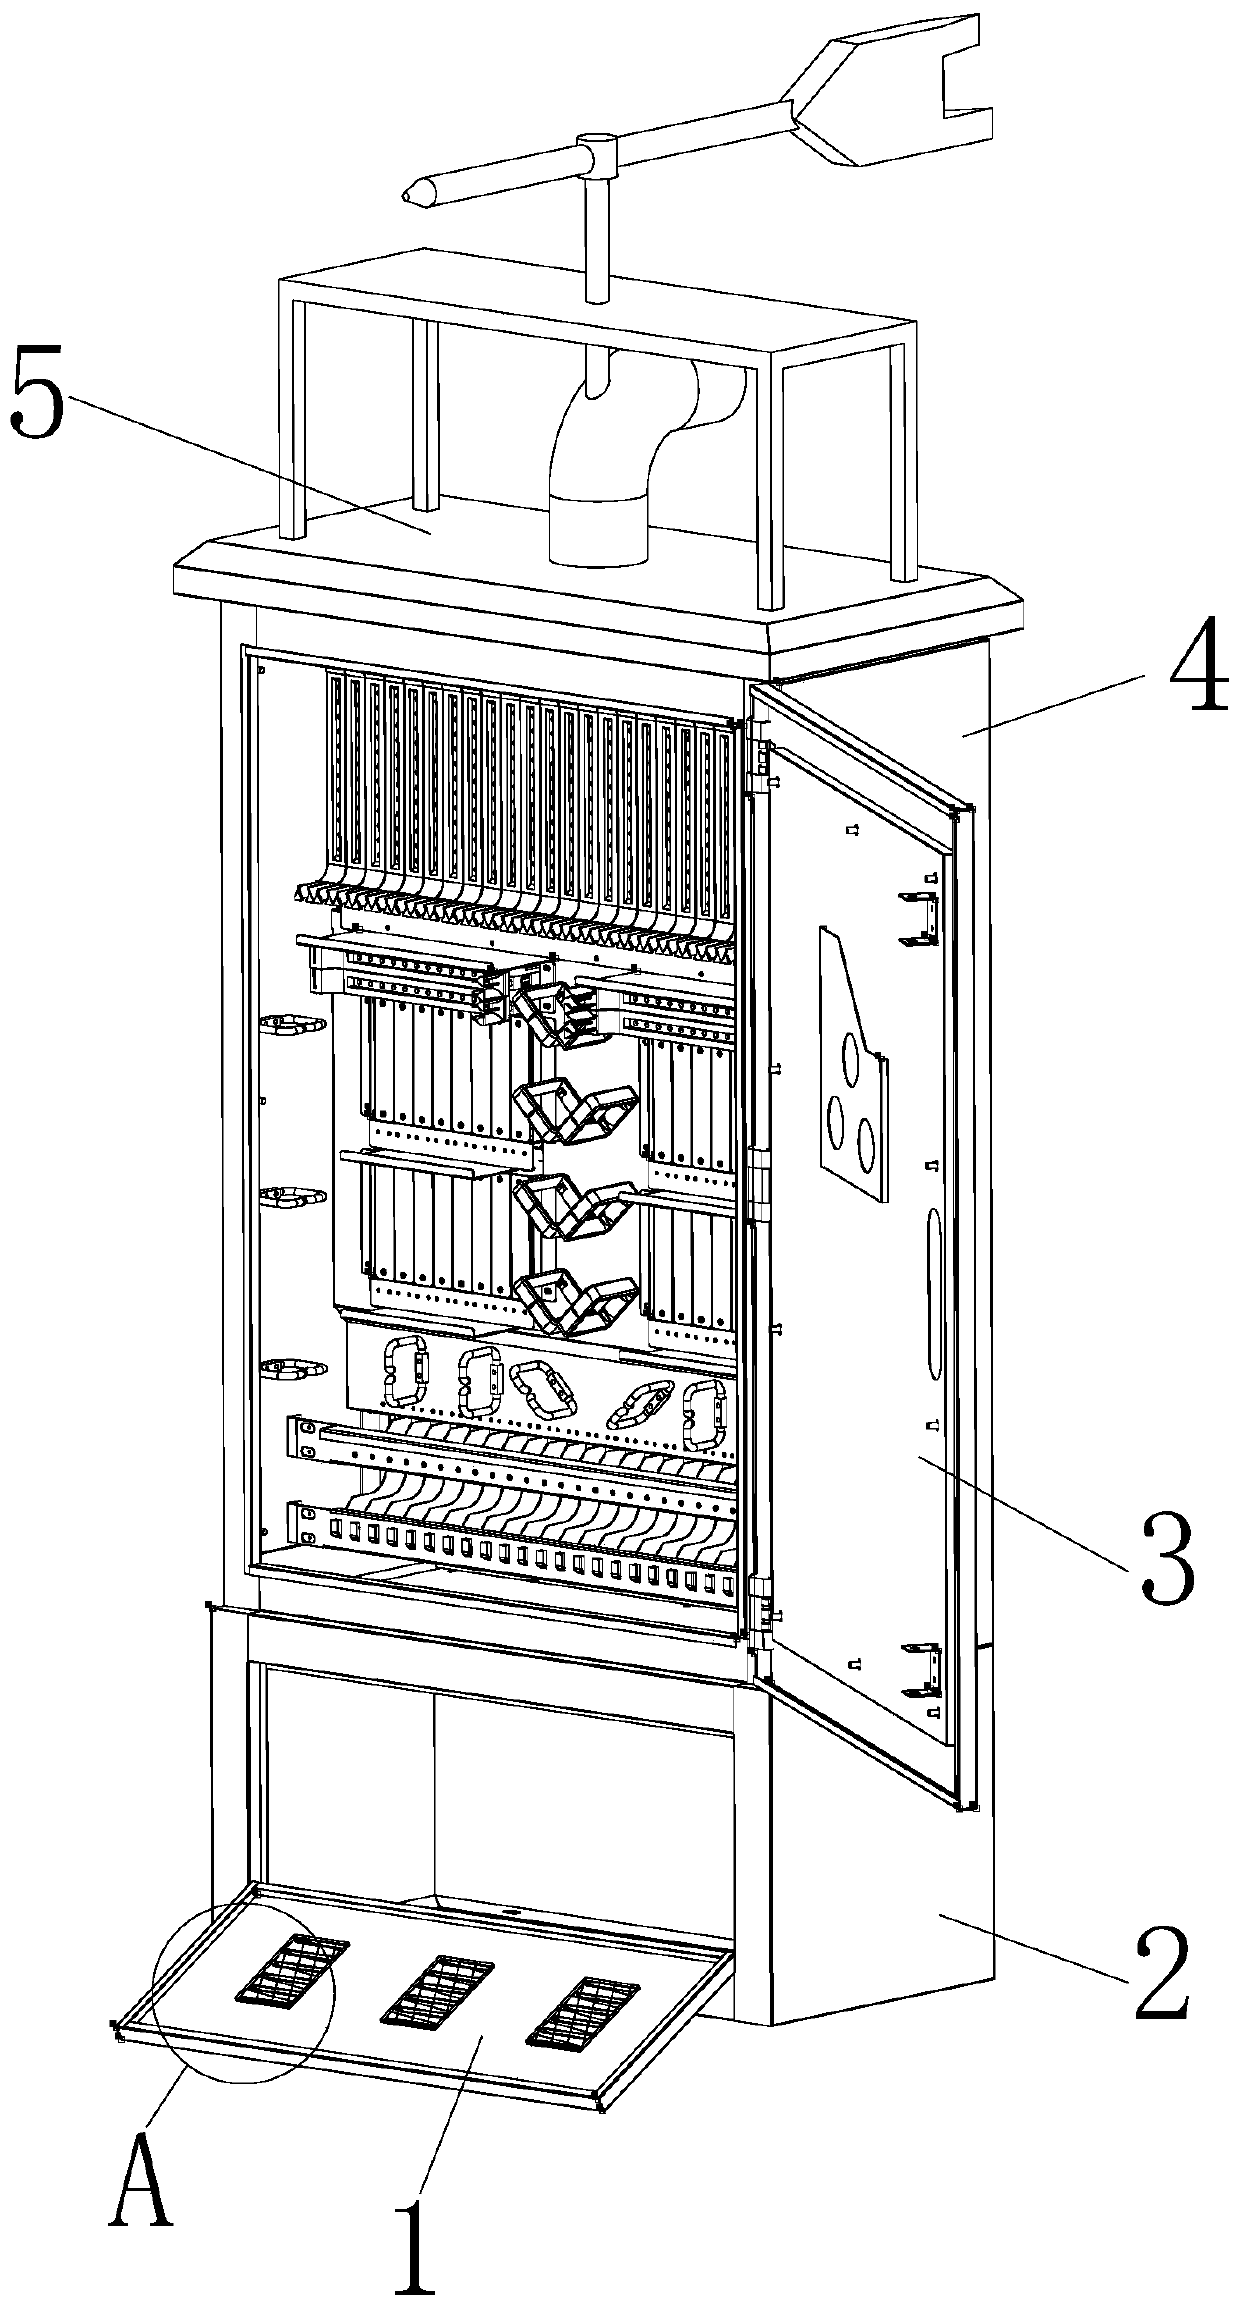 An optical cable transfer box with dust removal and heat dissipation functions